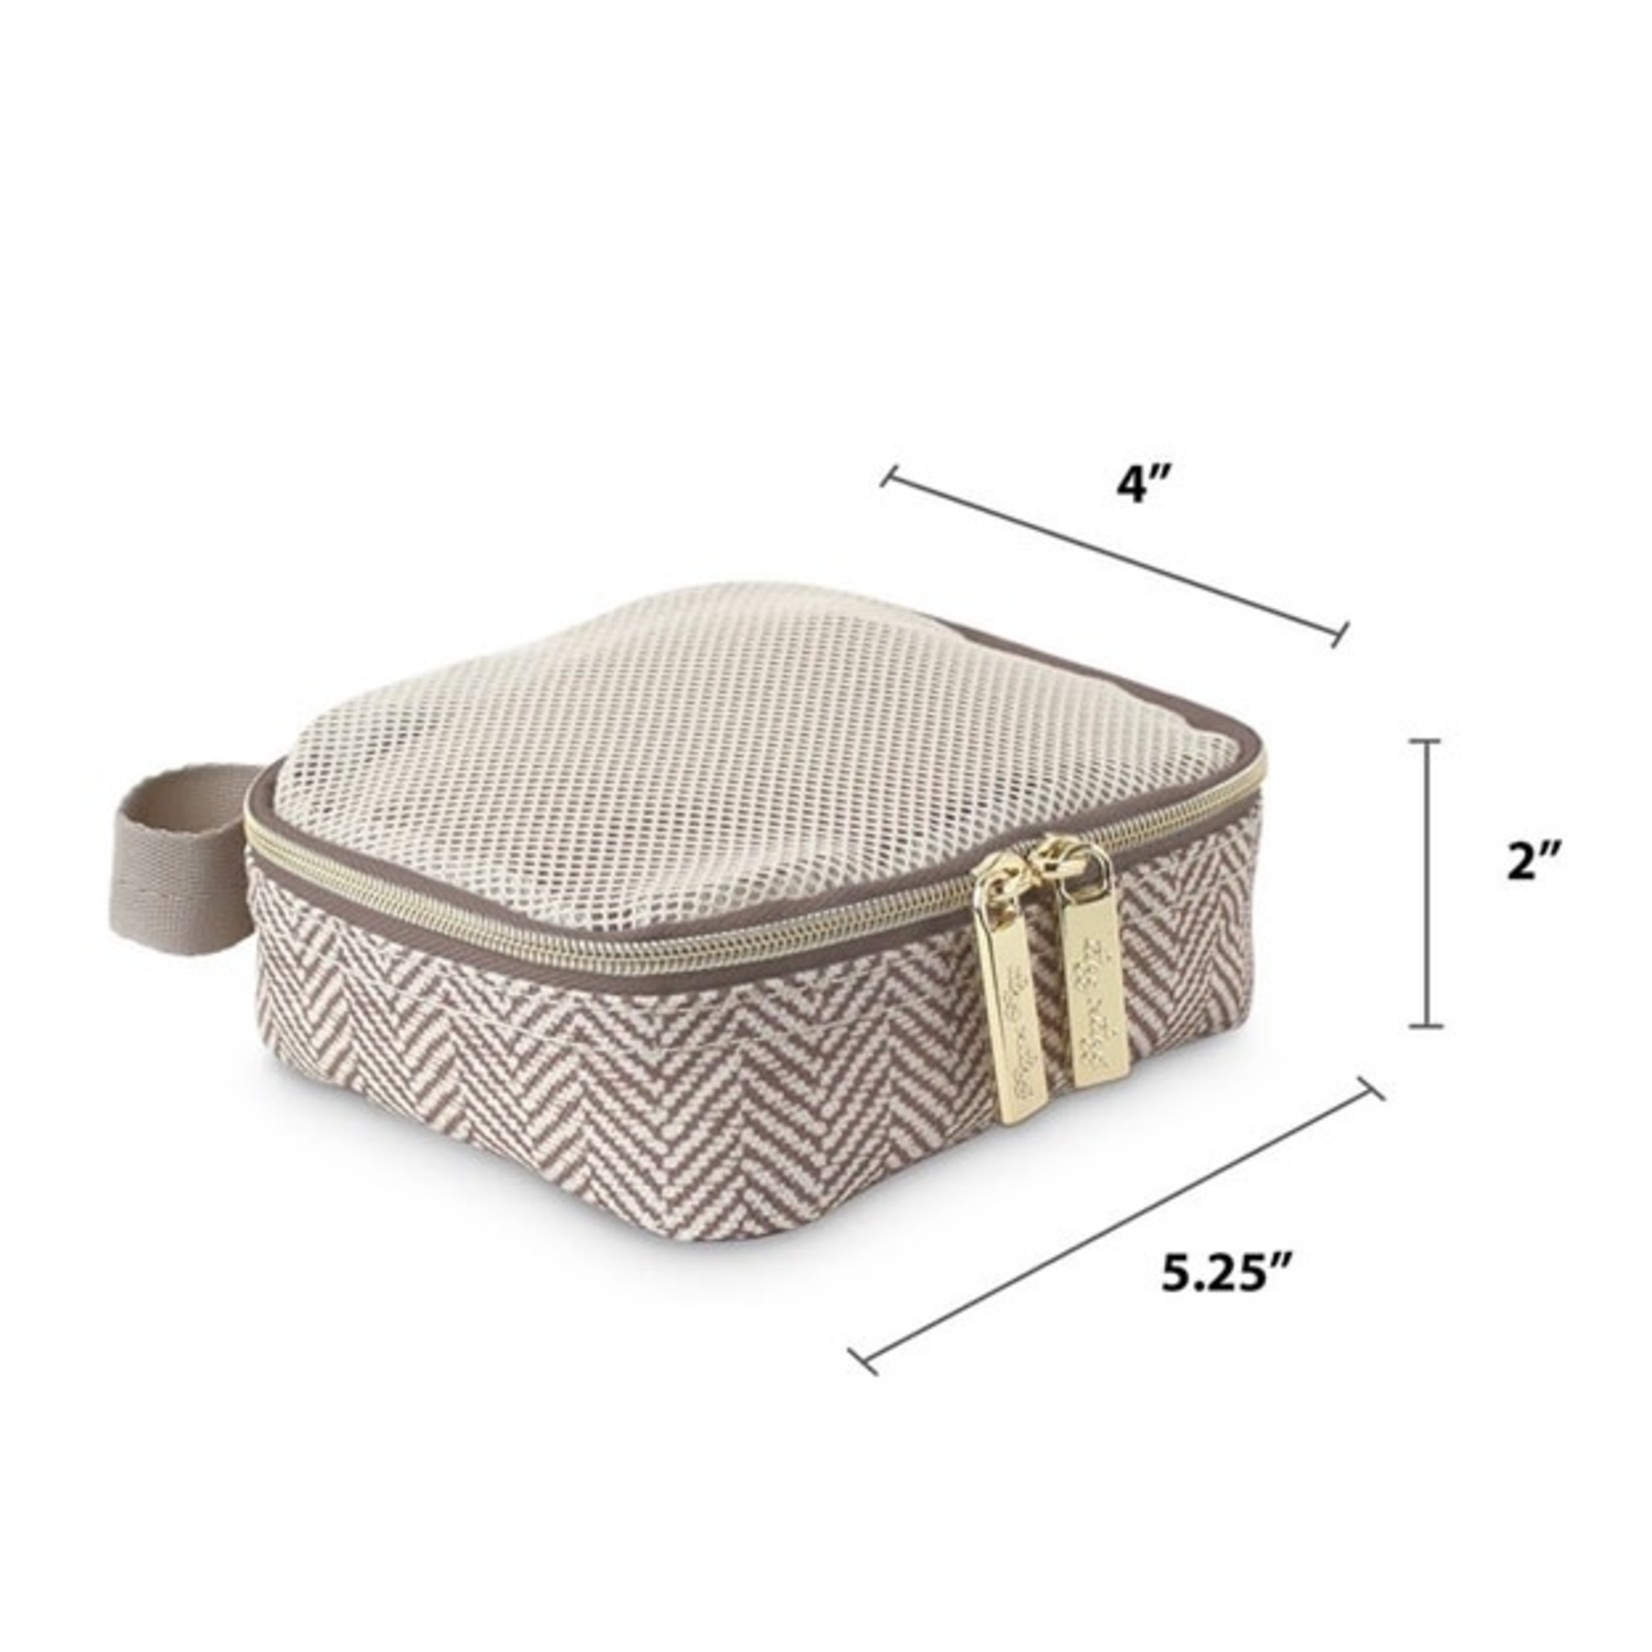 Itzy Ritzy Itzy Ritzy- Pack Like a Boss™ Diaper Bag Packing Cubes